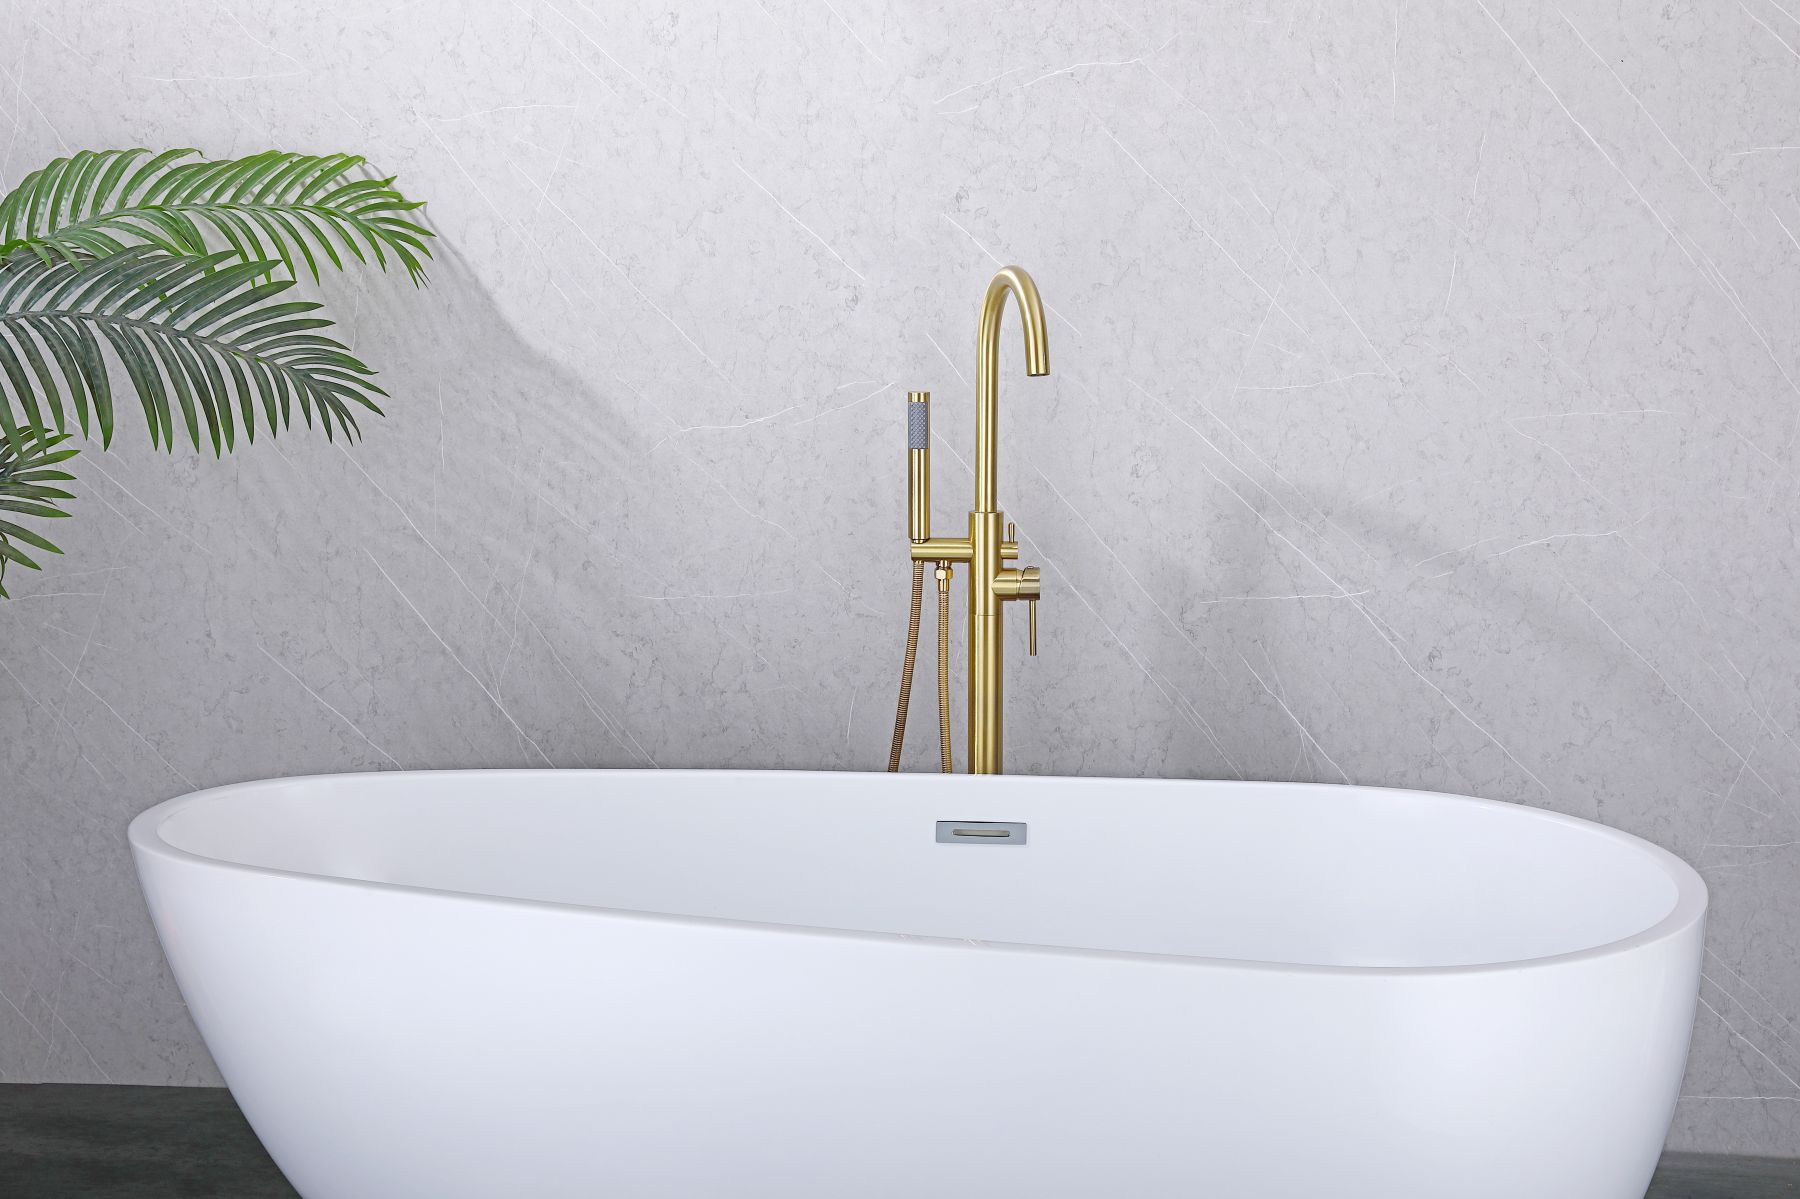 Luxury Free Standing Tub Faucet